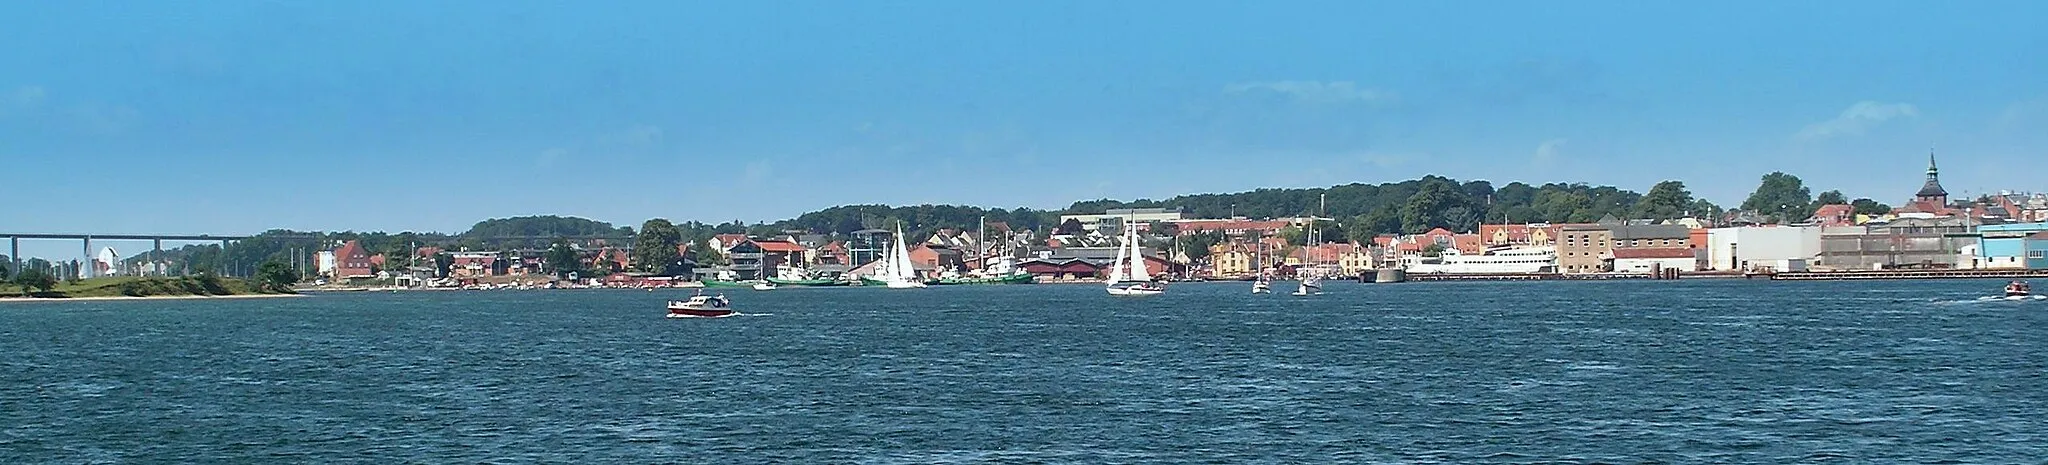 Photo showing: Panorama view of Svendborg, from the Svendborg Sund bridge on the left to the town centre on the right